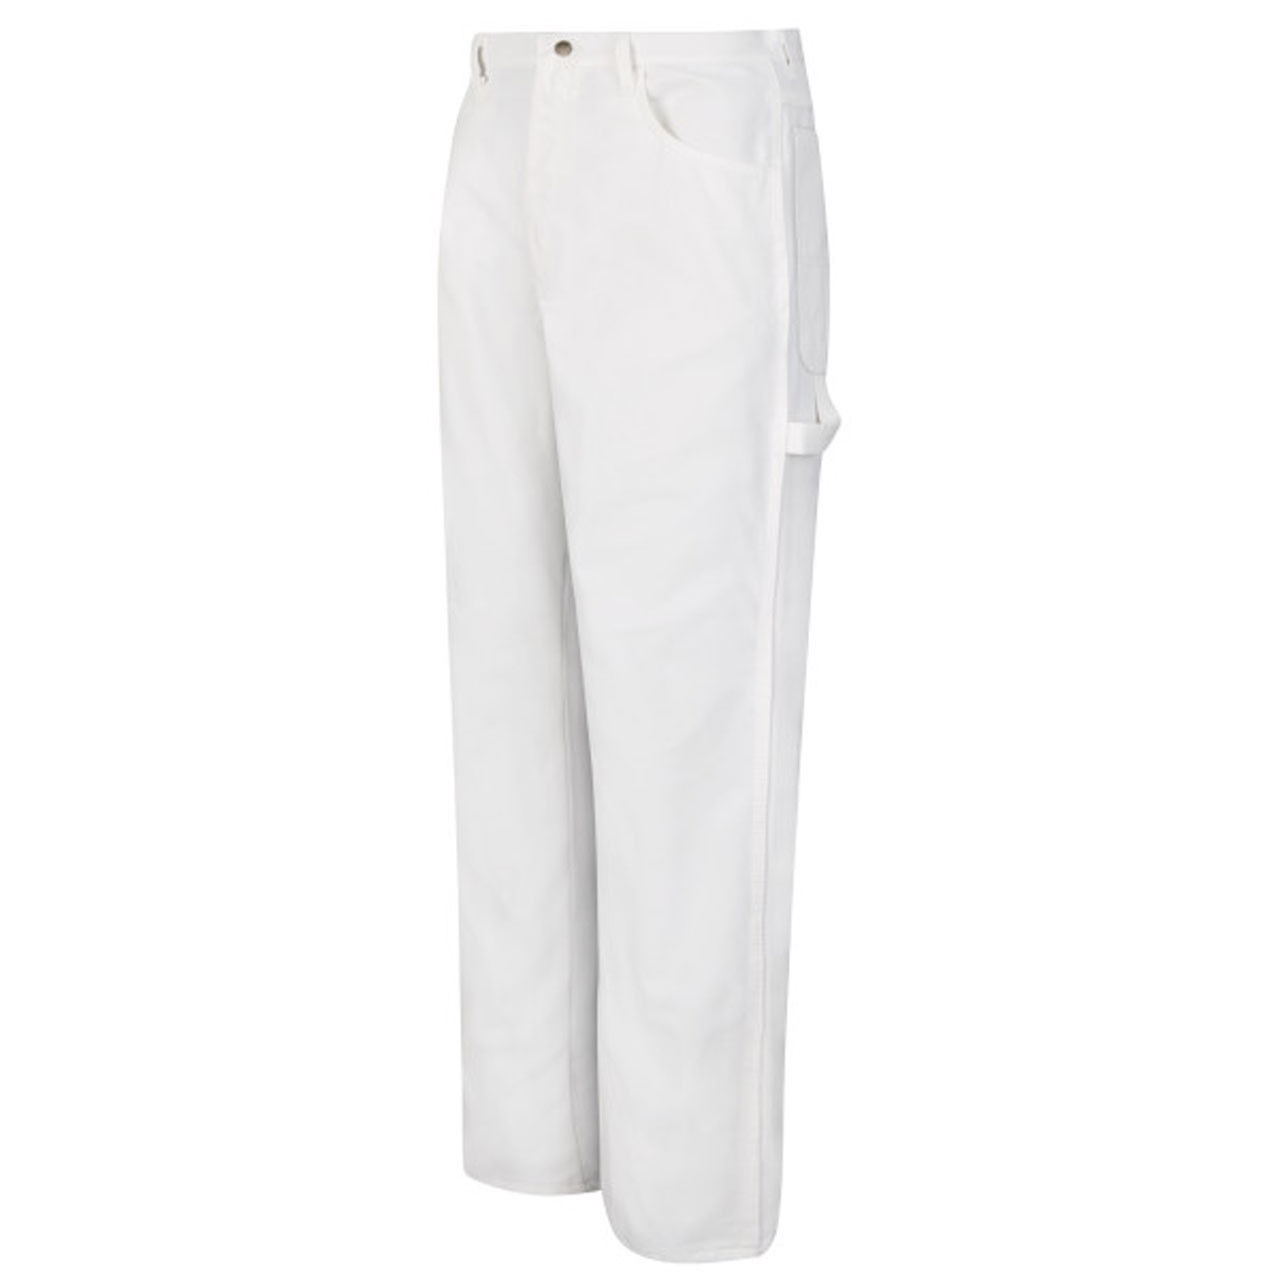 What color is this painter pant I'm considering to buy?